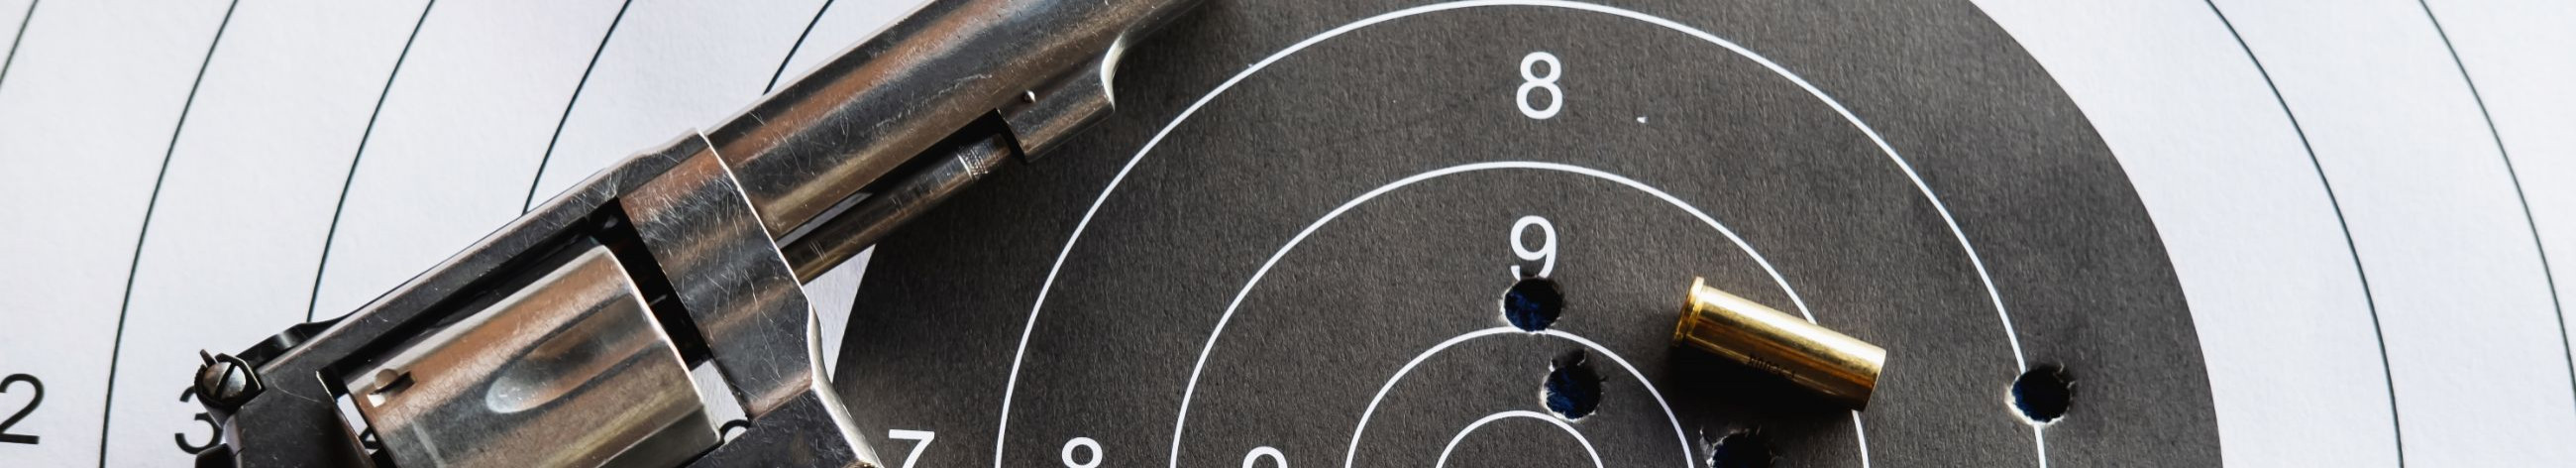 We offer personal shooting coaching, firearms rental, and comprehensive shooting training at our state-of-the-art range.